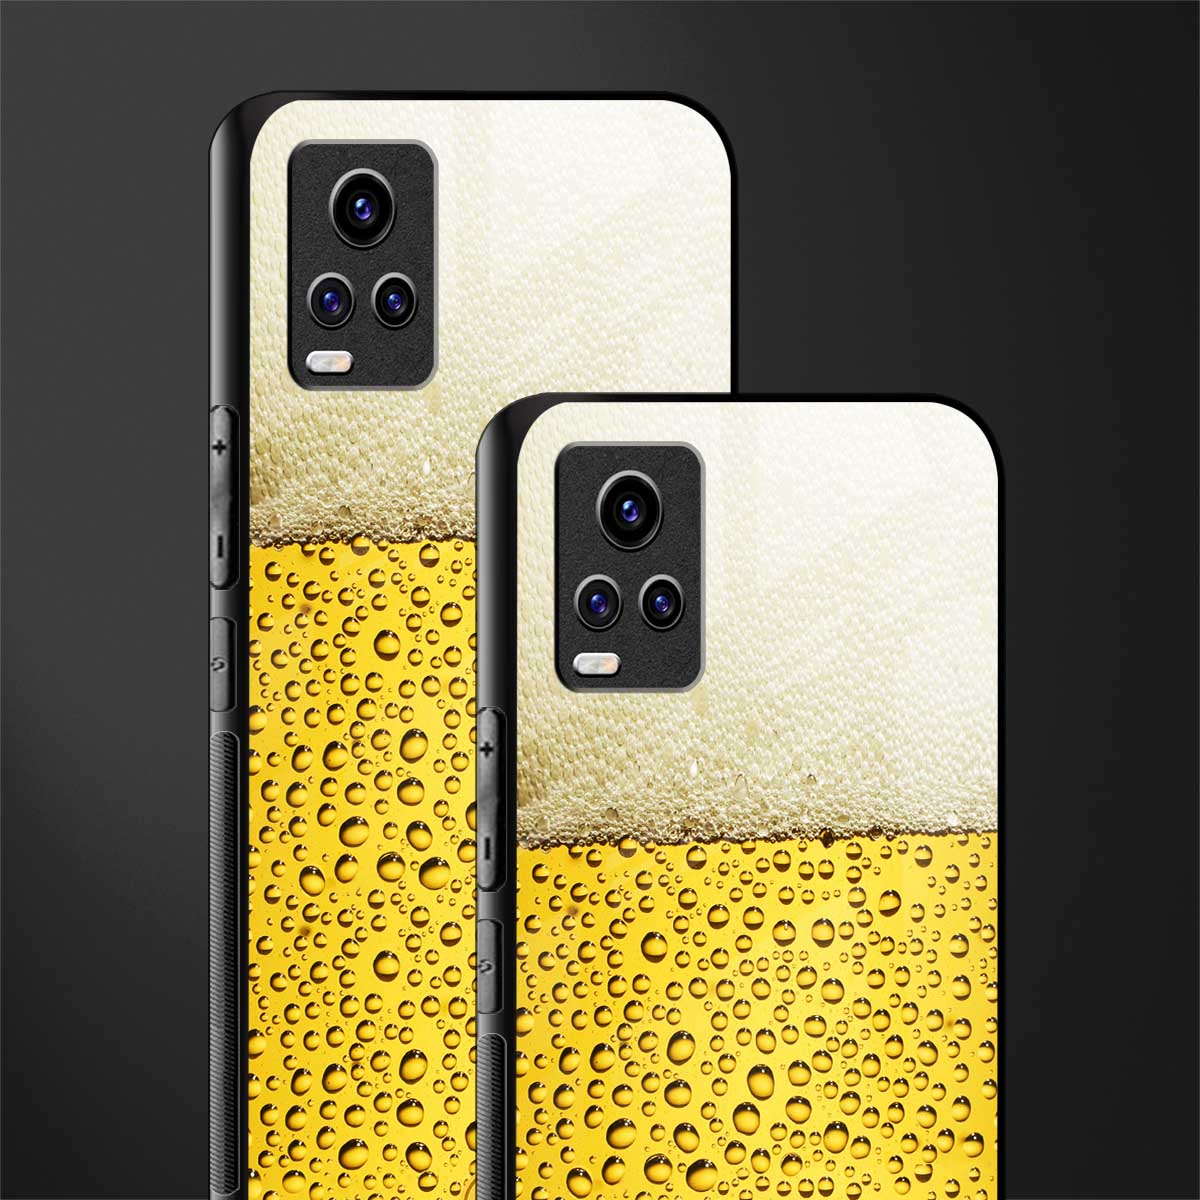 fizzy beer back phone cover | glass case for vivo y73